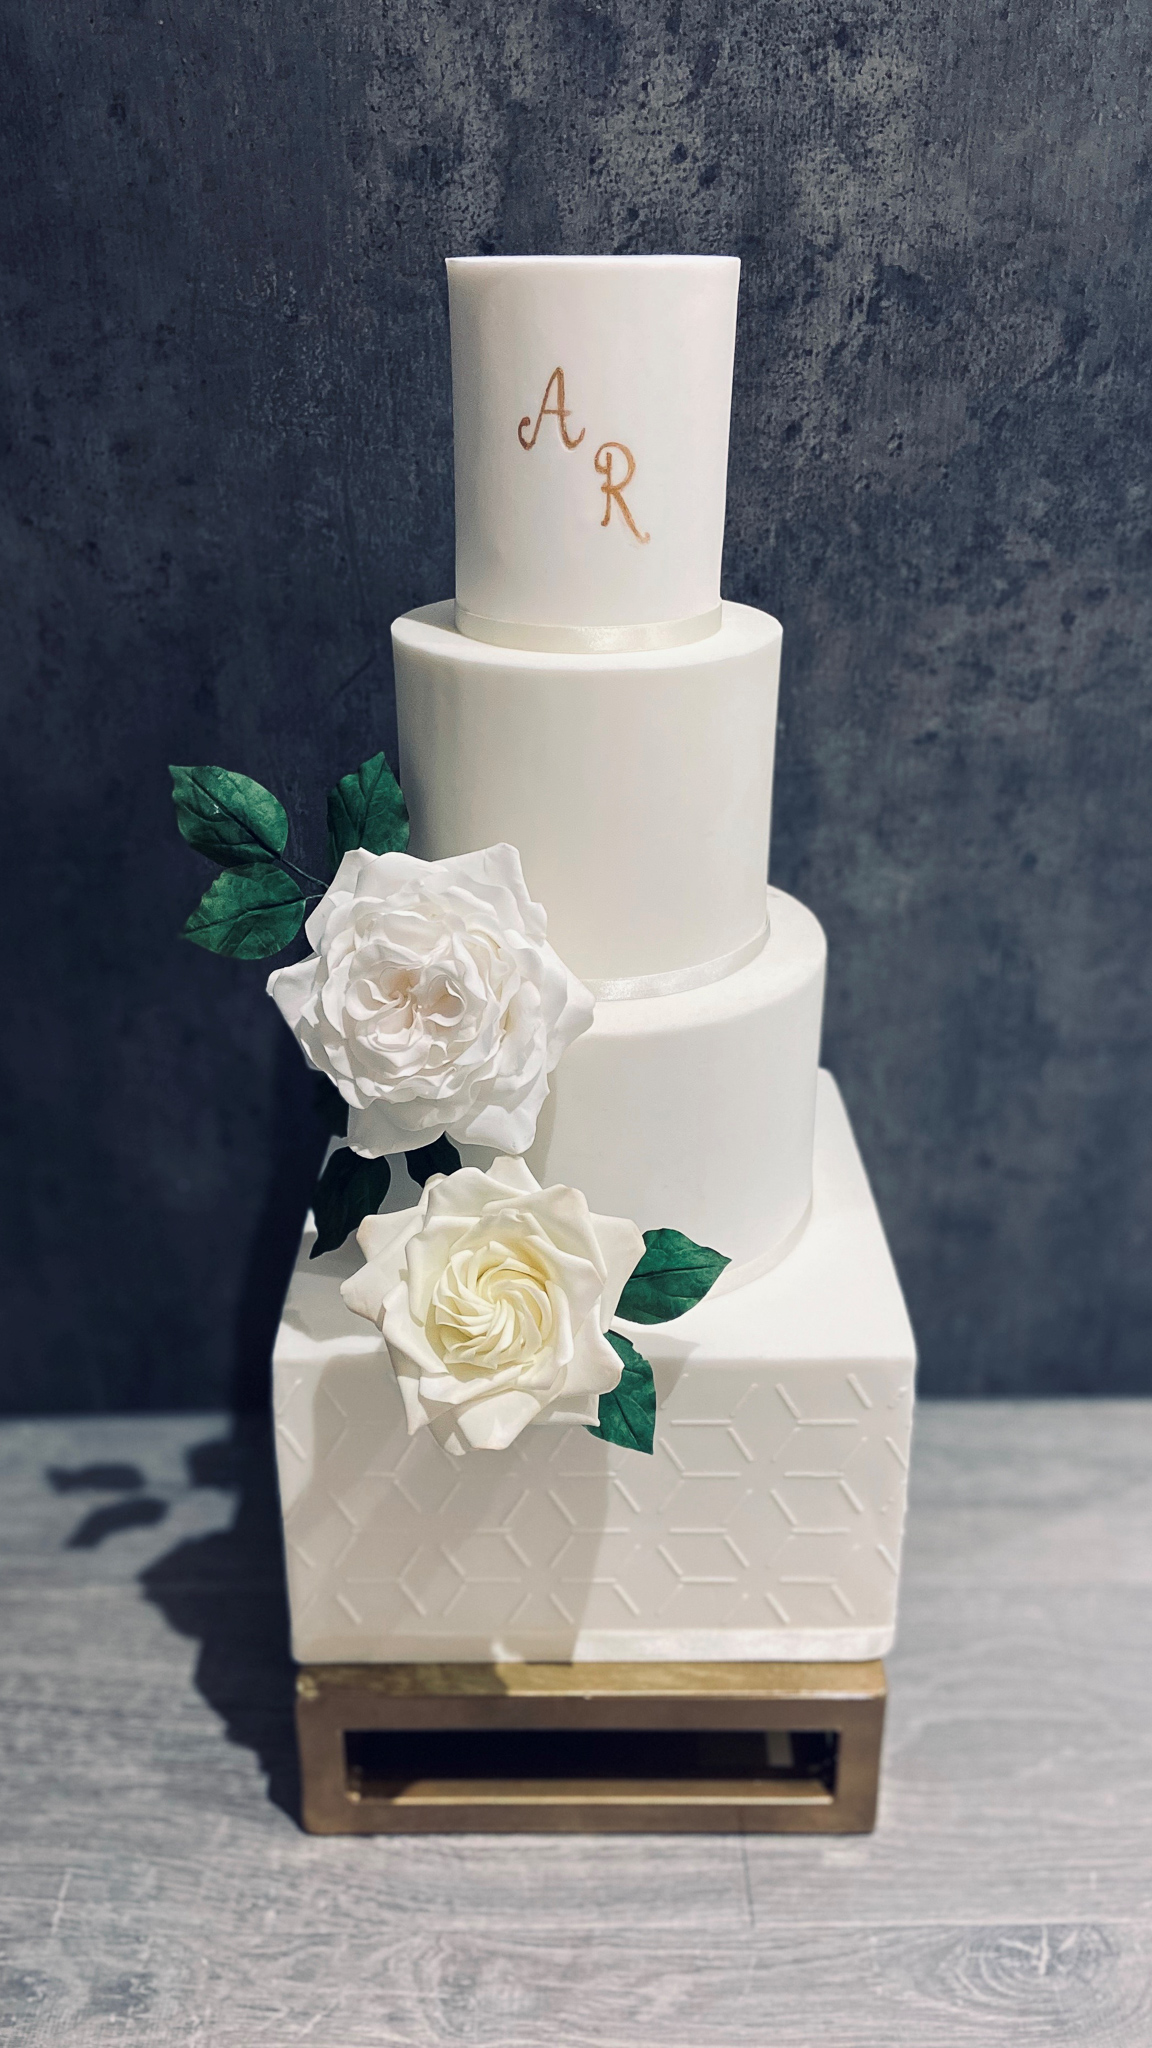 Four tier wedding cake with square base and statement sugar flowers